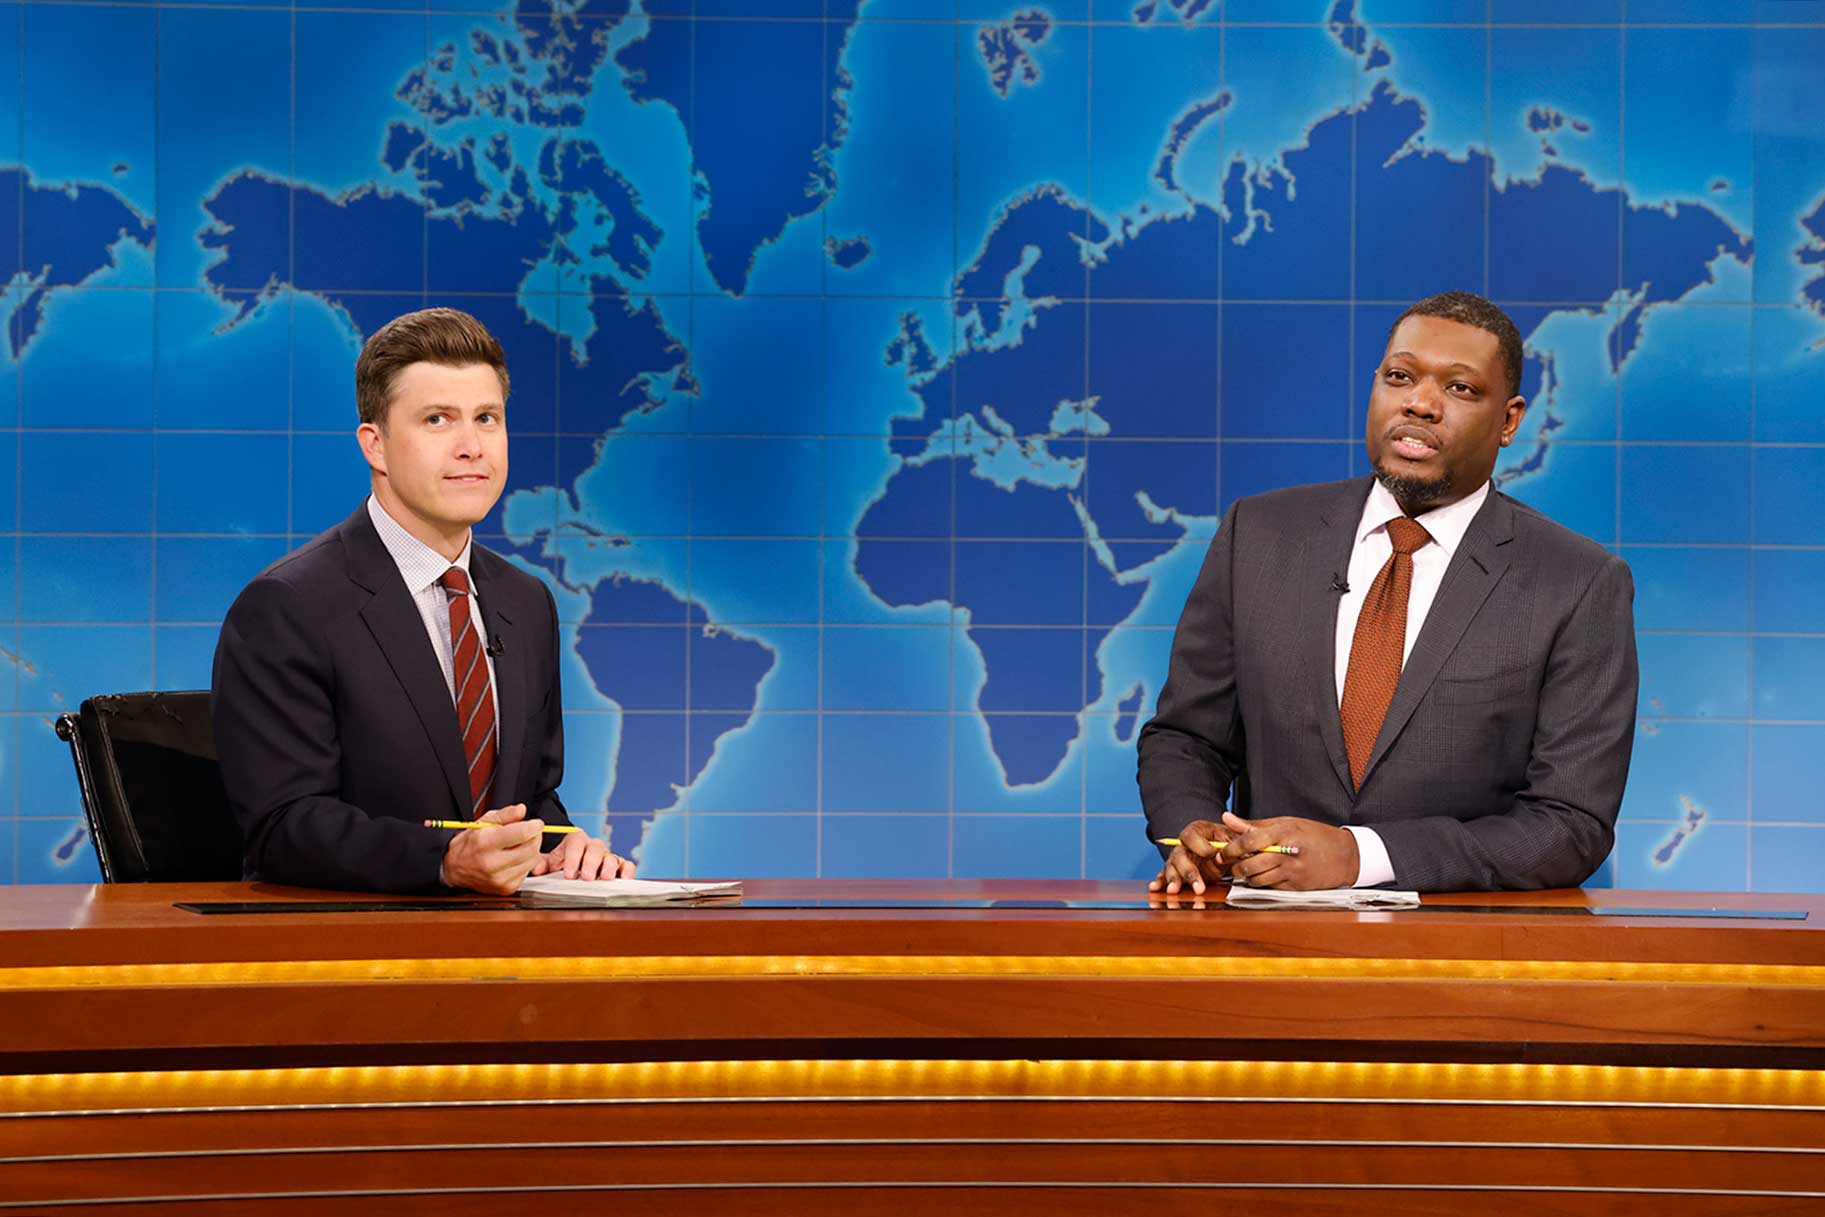 Colin Jost and Michael Che on "Weekend Update." Photo courtesy of NBC